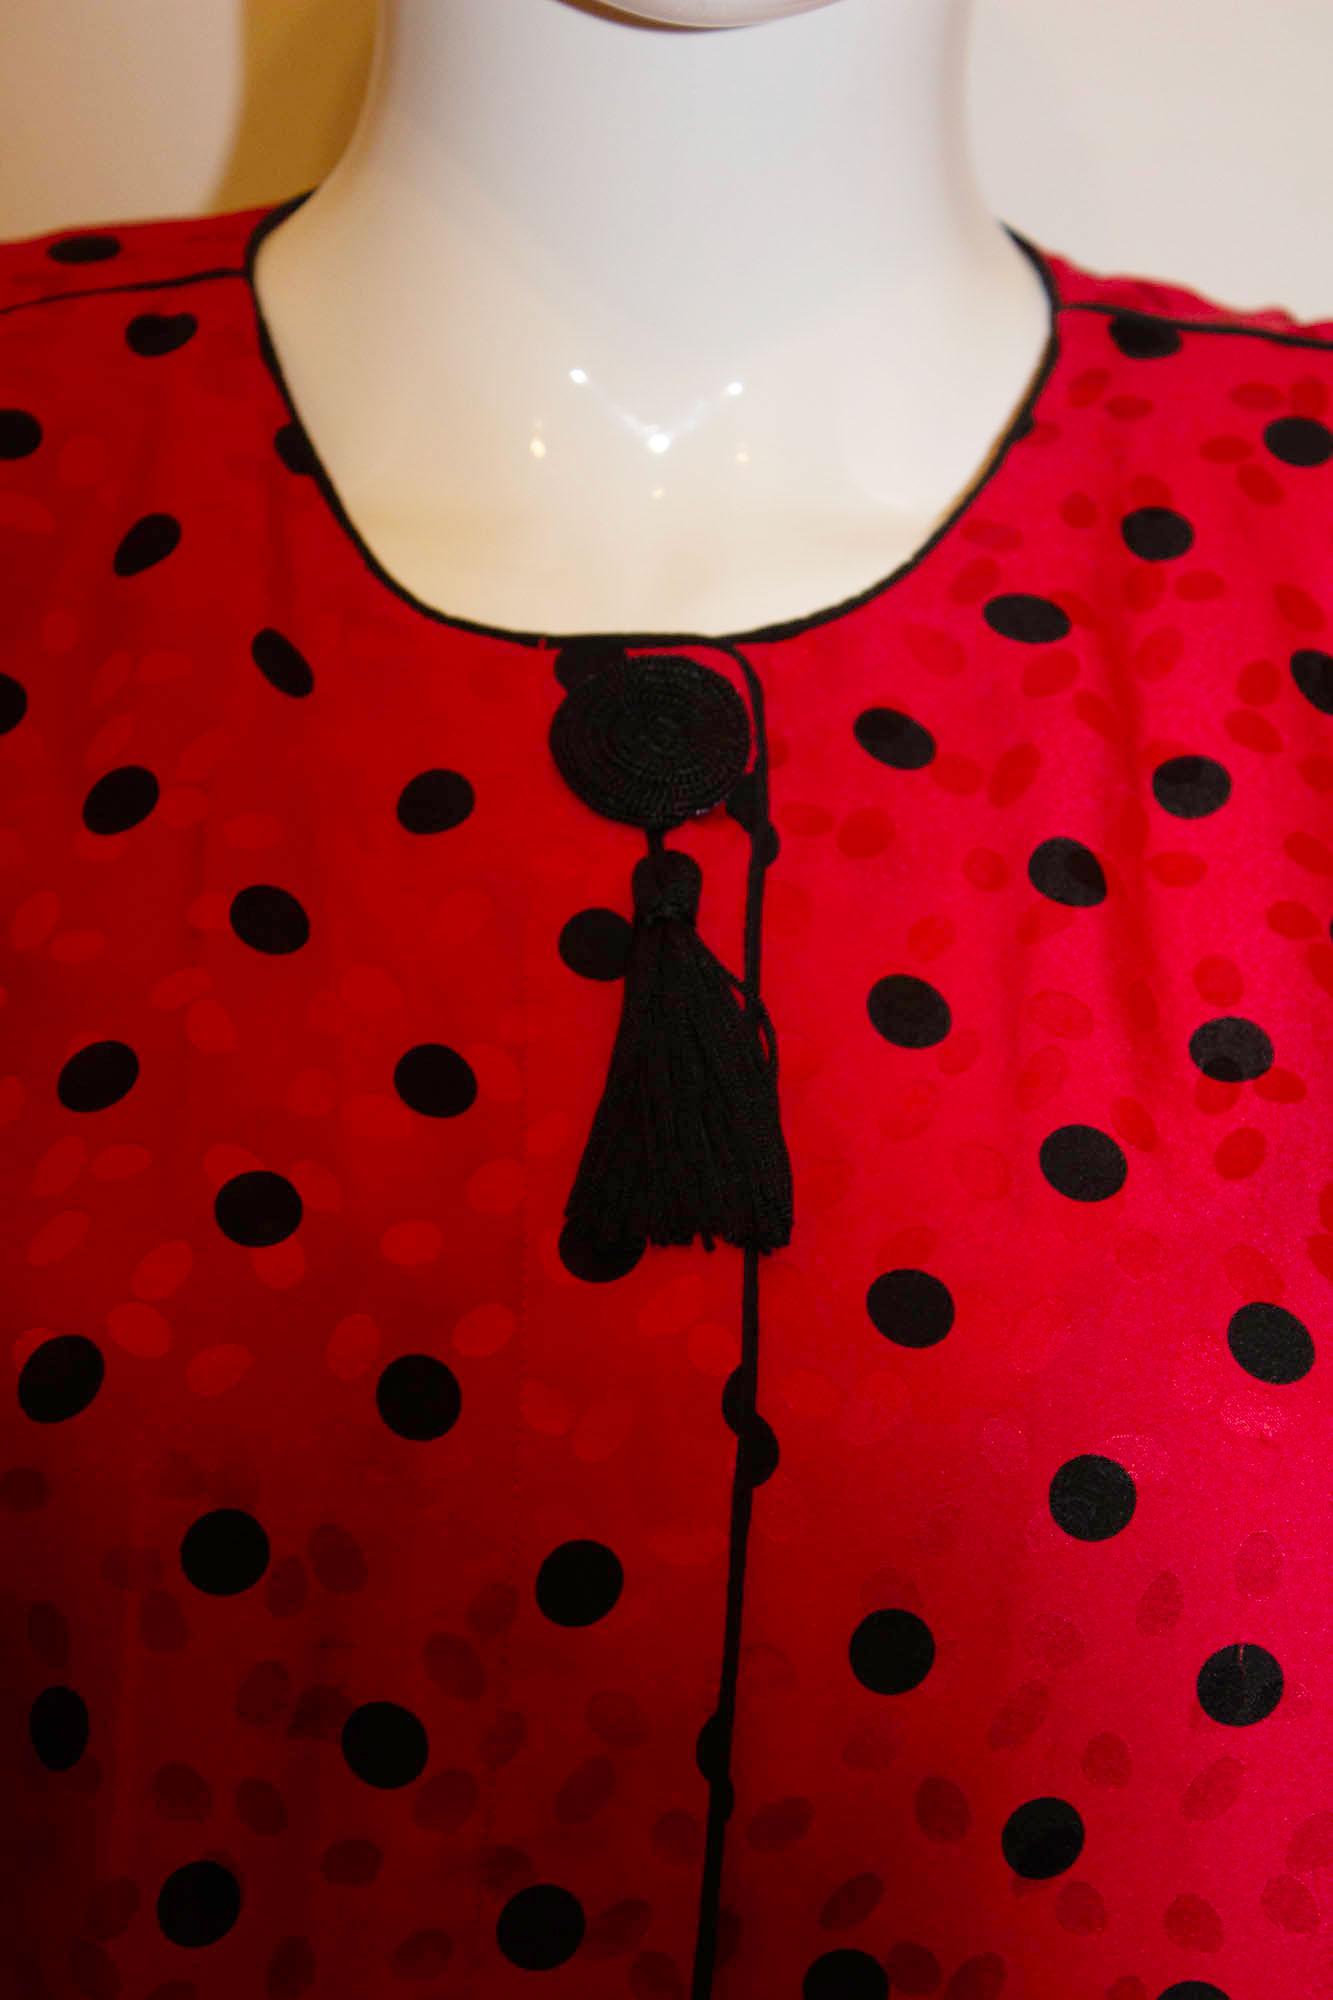 A fun vintage top by Maggy London . In a wonderful red silk with red and black dot detail. The top has a hidden button front opening, with tassle decoration, a silk knot cuffs. It has the original 1980s shoulder pads, but these can be removed.